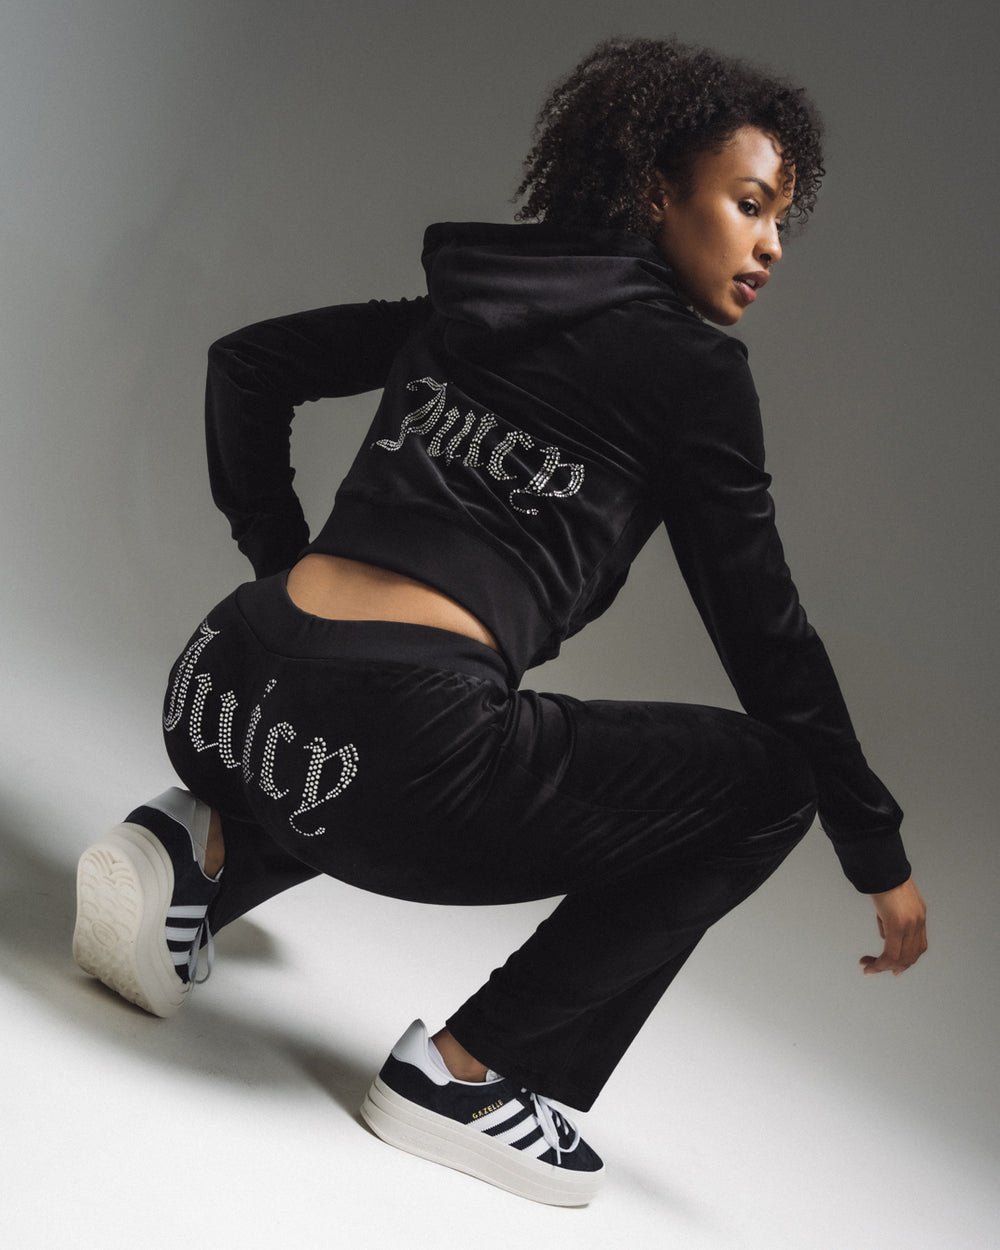 Introducing Juicy Couture at JD Sports Canada